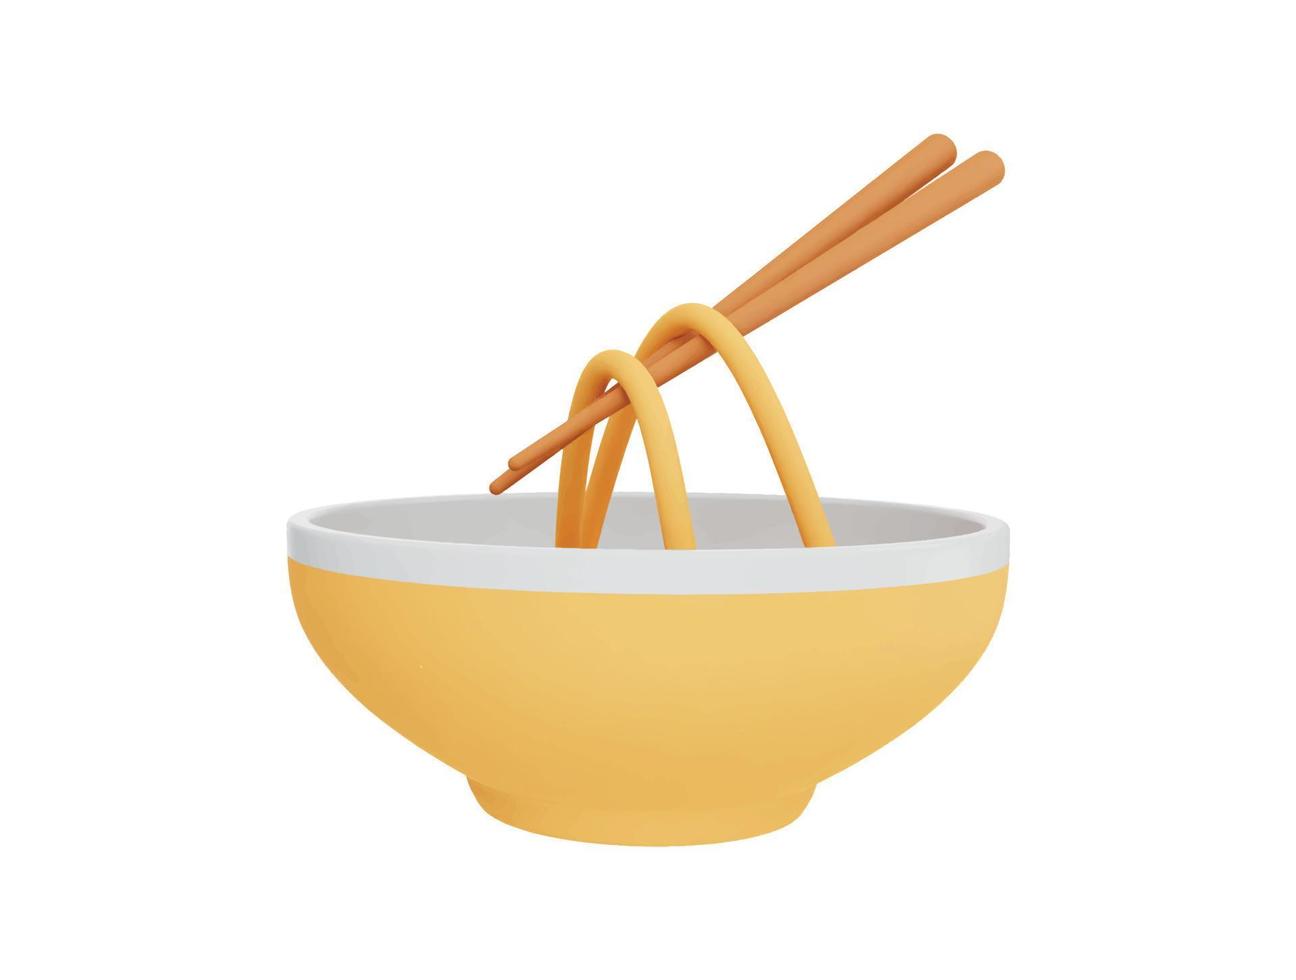 Chinese noodle and chopsticks with 3d vector icon cartoon minimal style